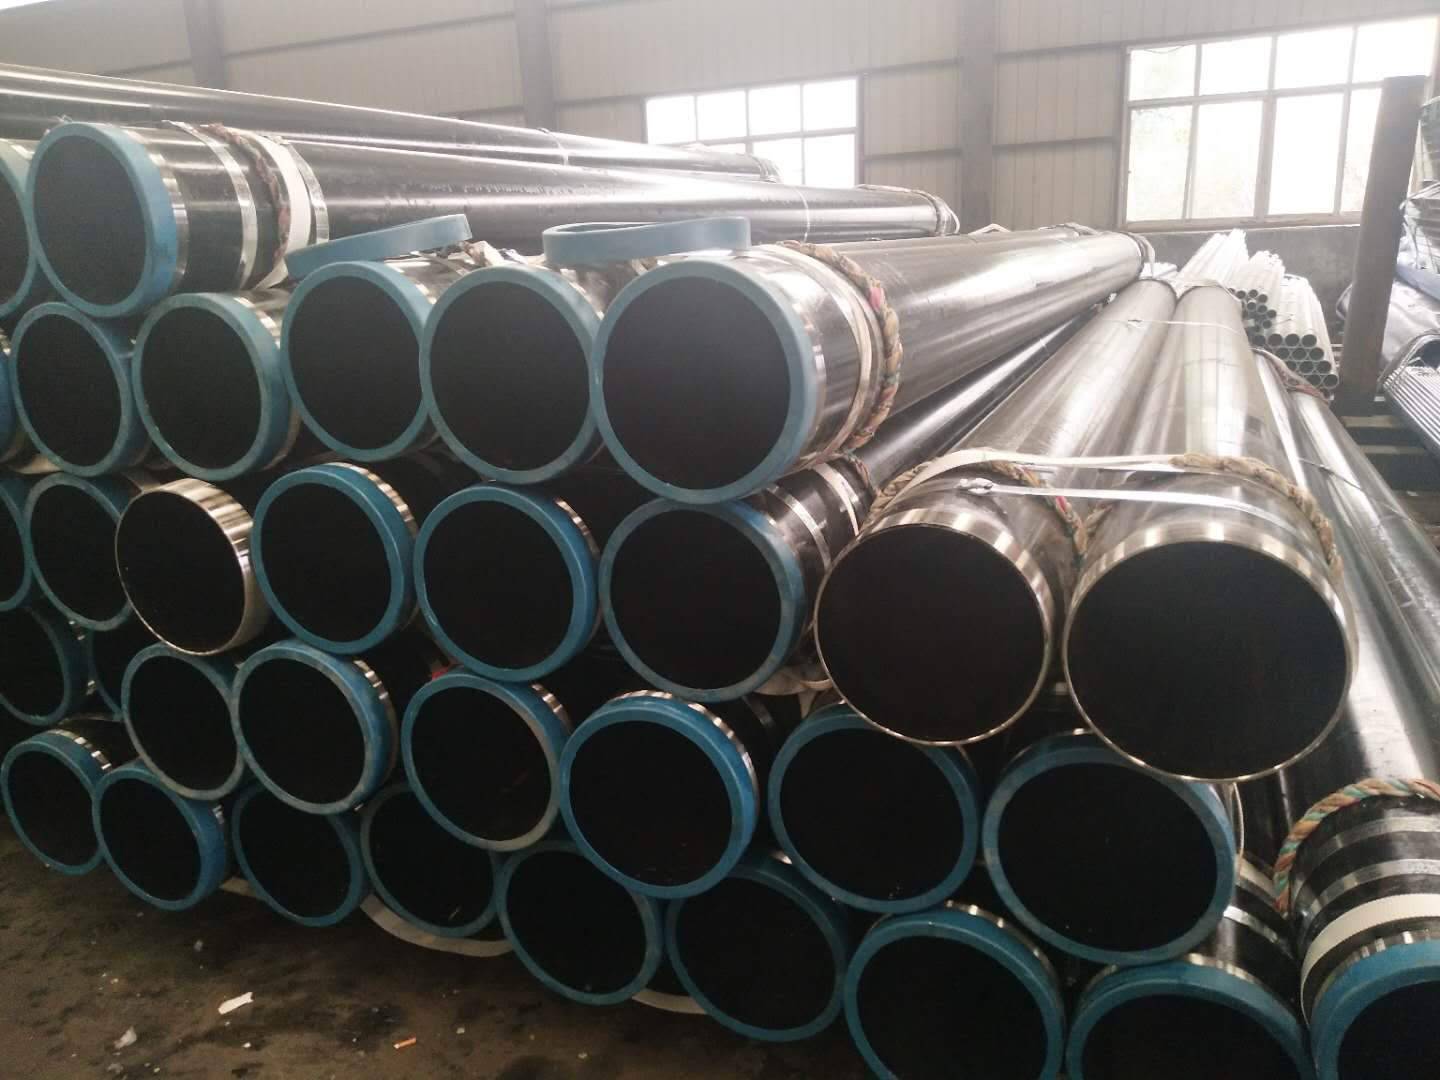 ERW Steel Pipe with Threaded ends Passed strictly Inspection and delivered successfully